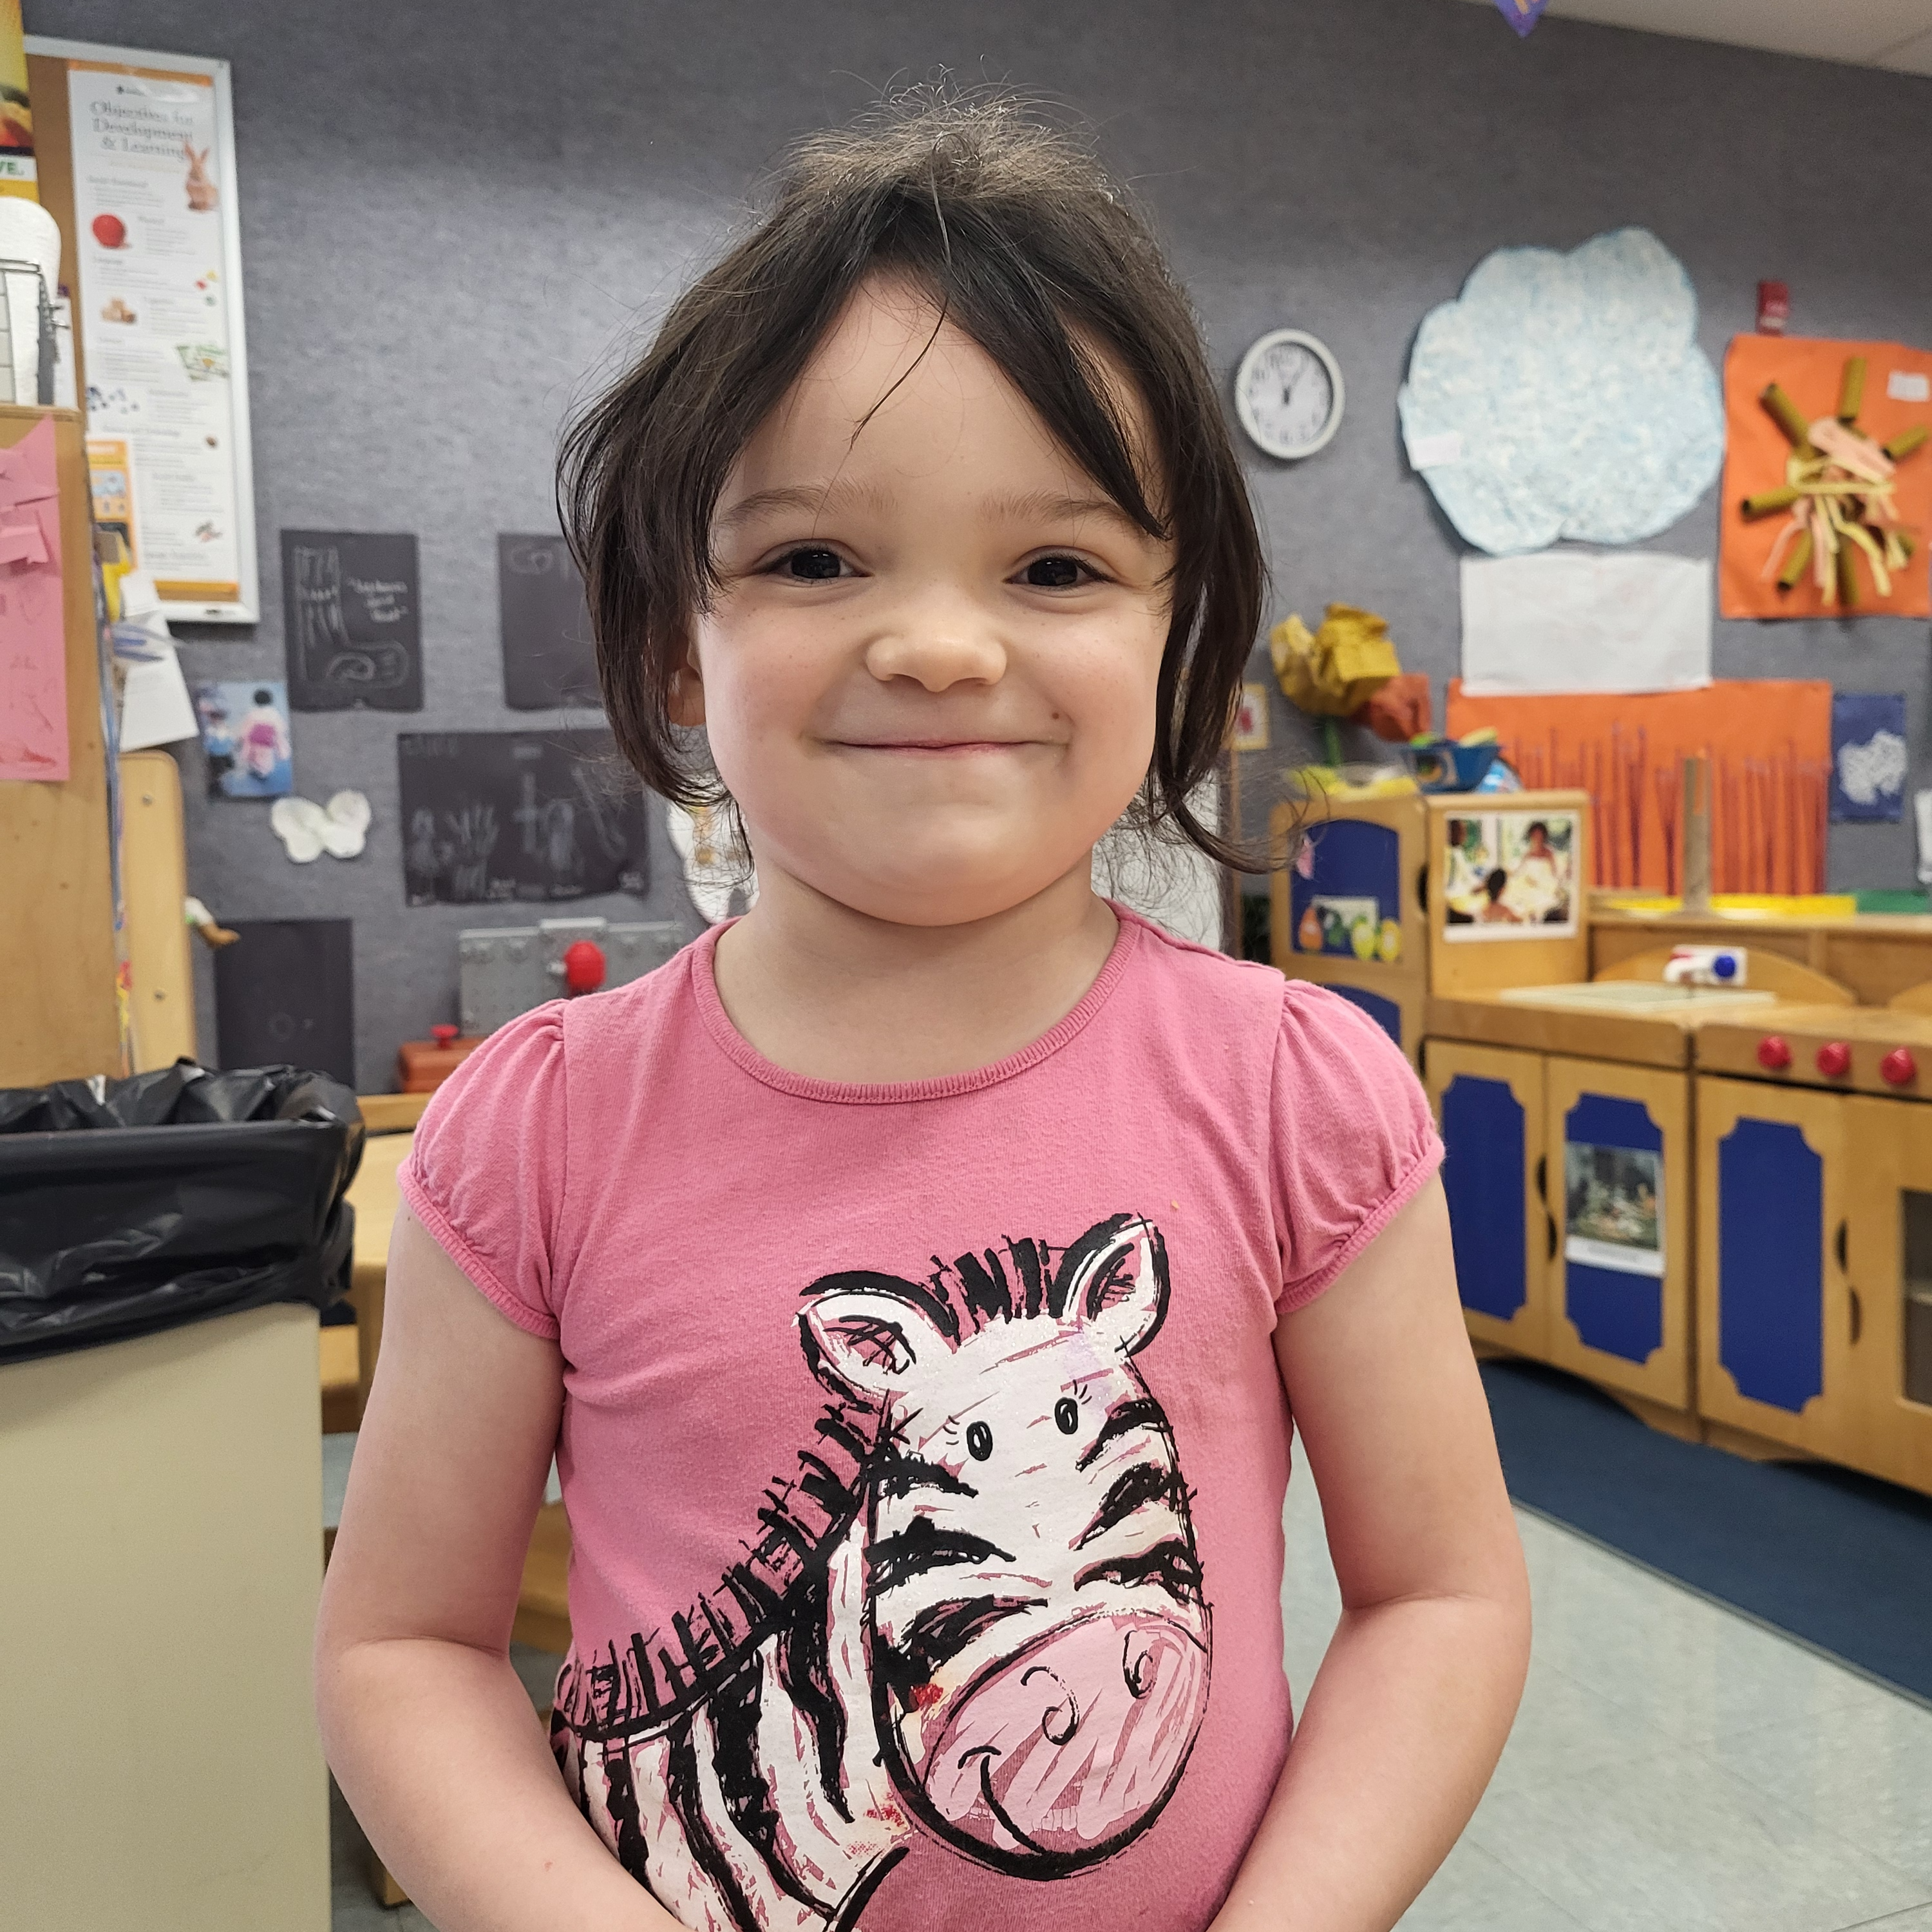 Young girl with dark hair wearing a pink t-shirt with a zebra